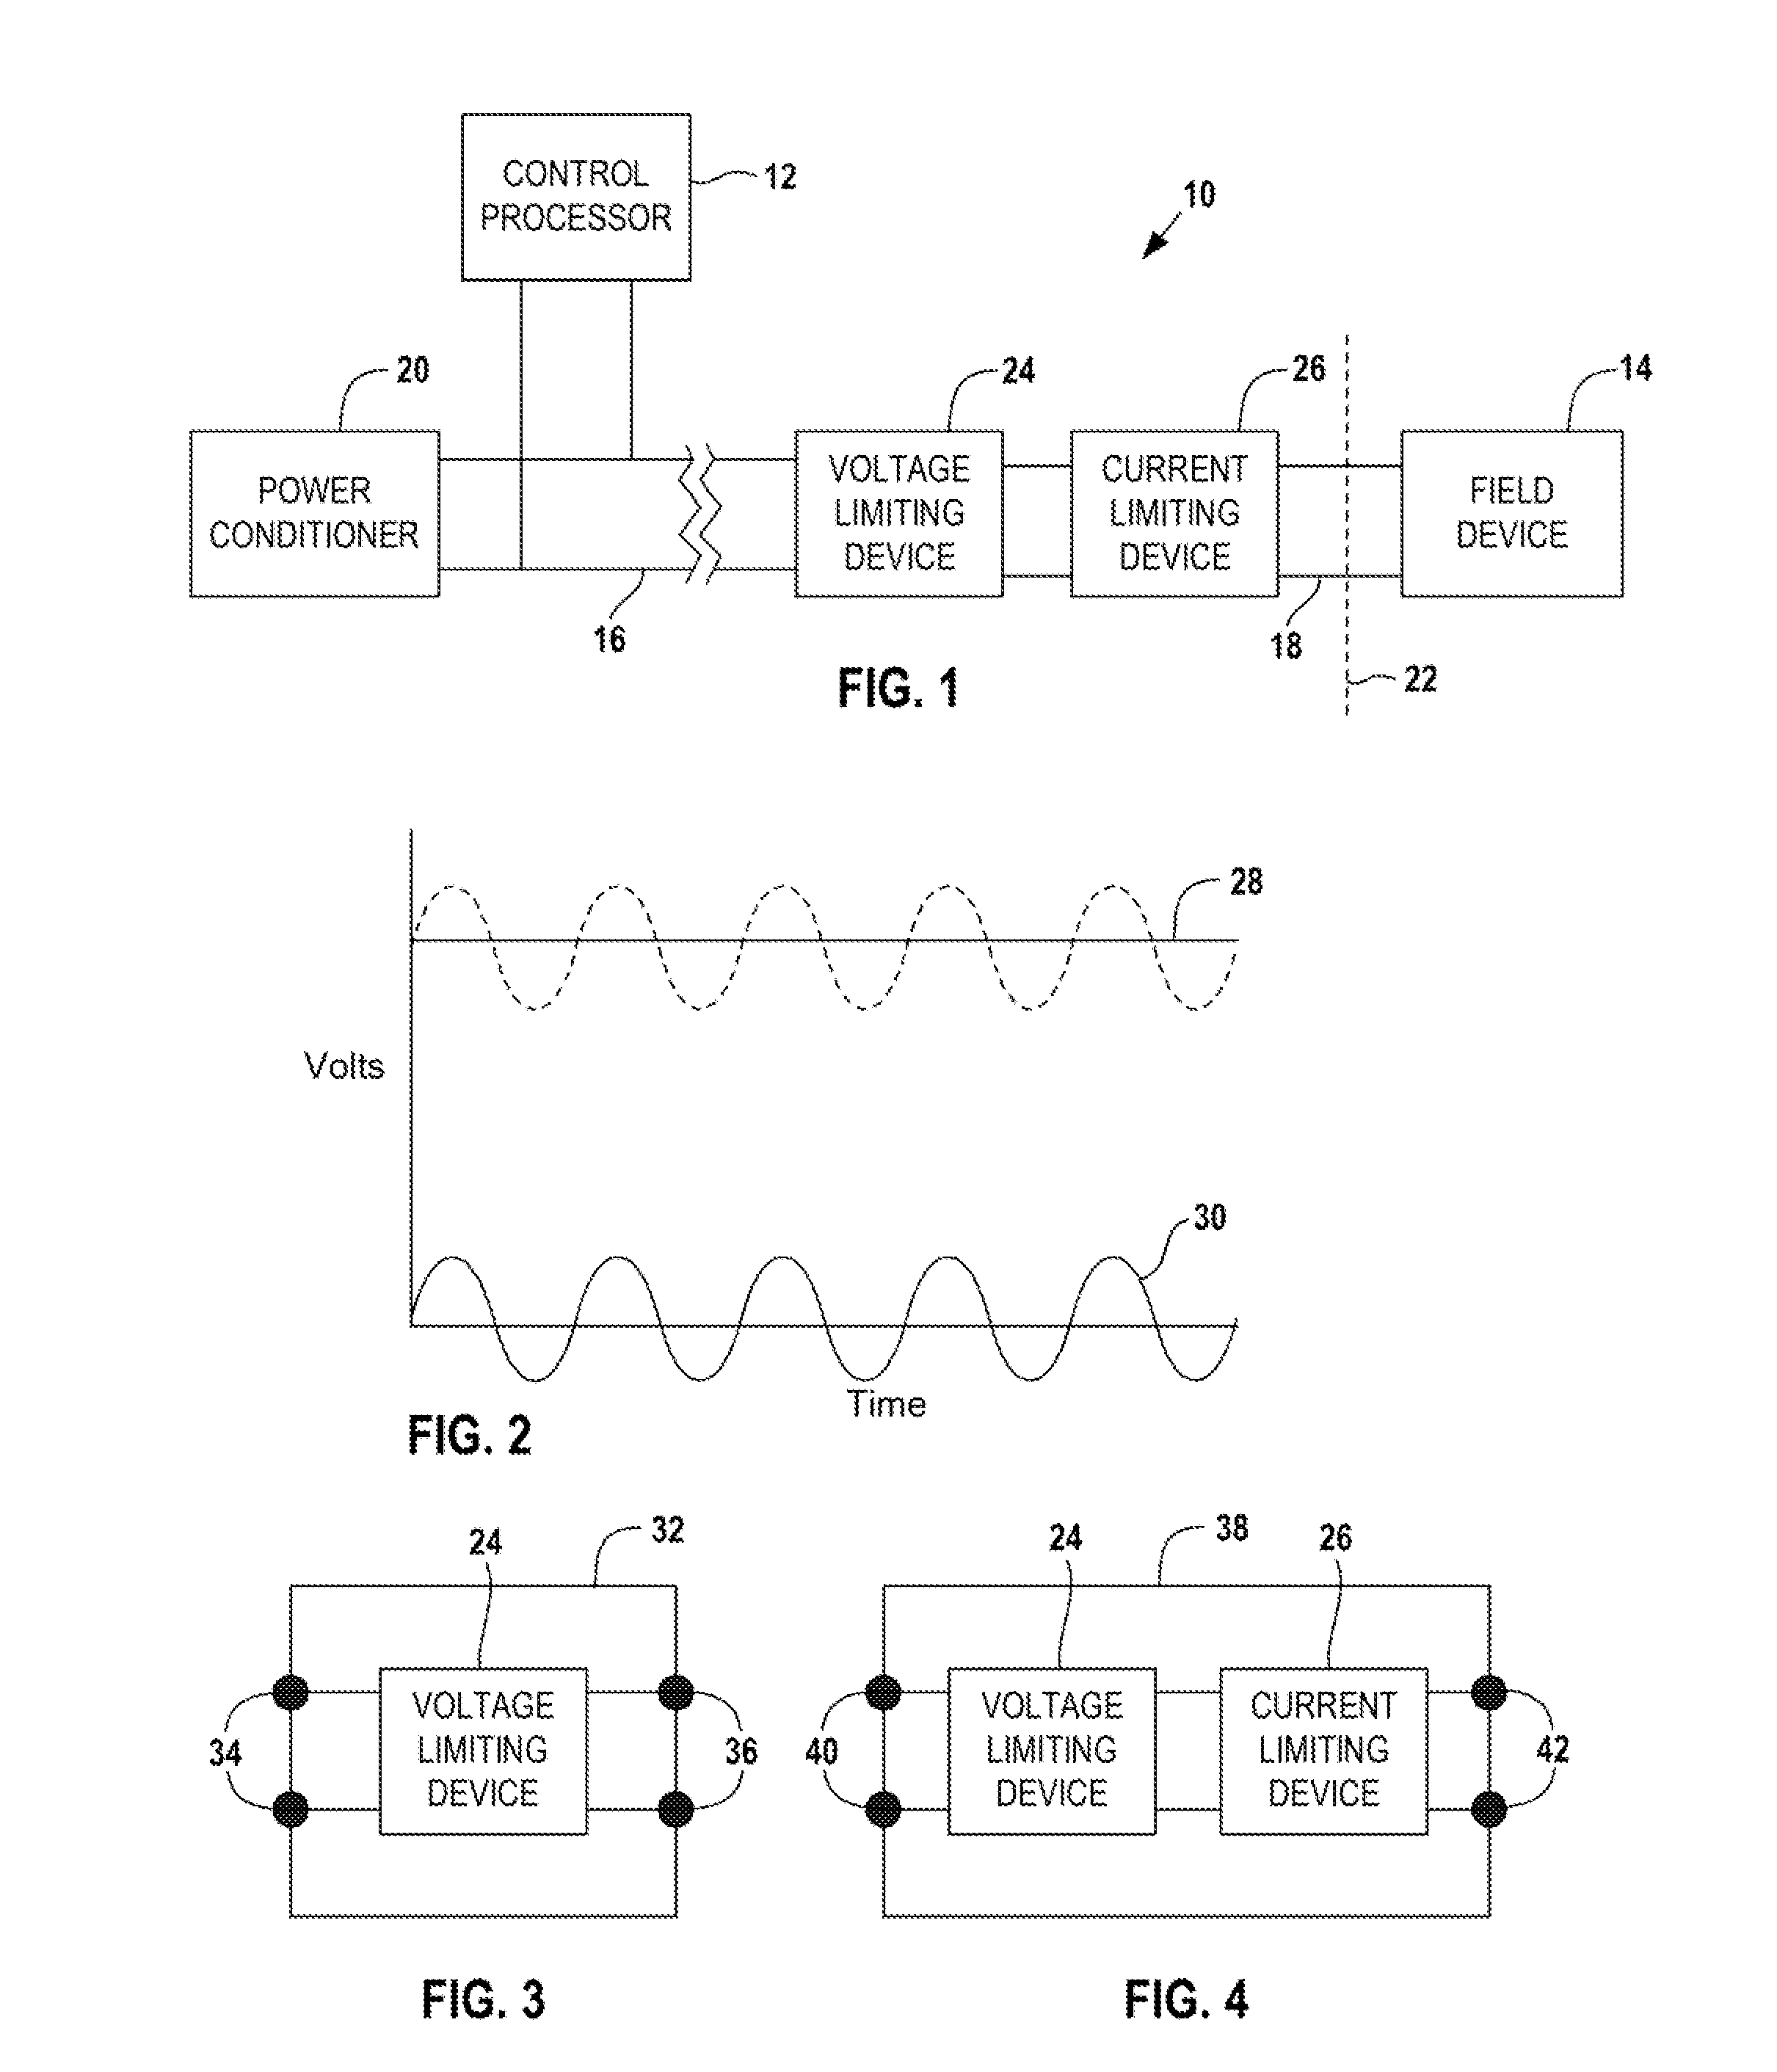 Voltage Limiting Device for Use in a Distributed Control System